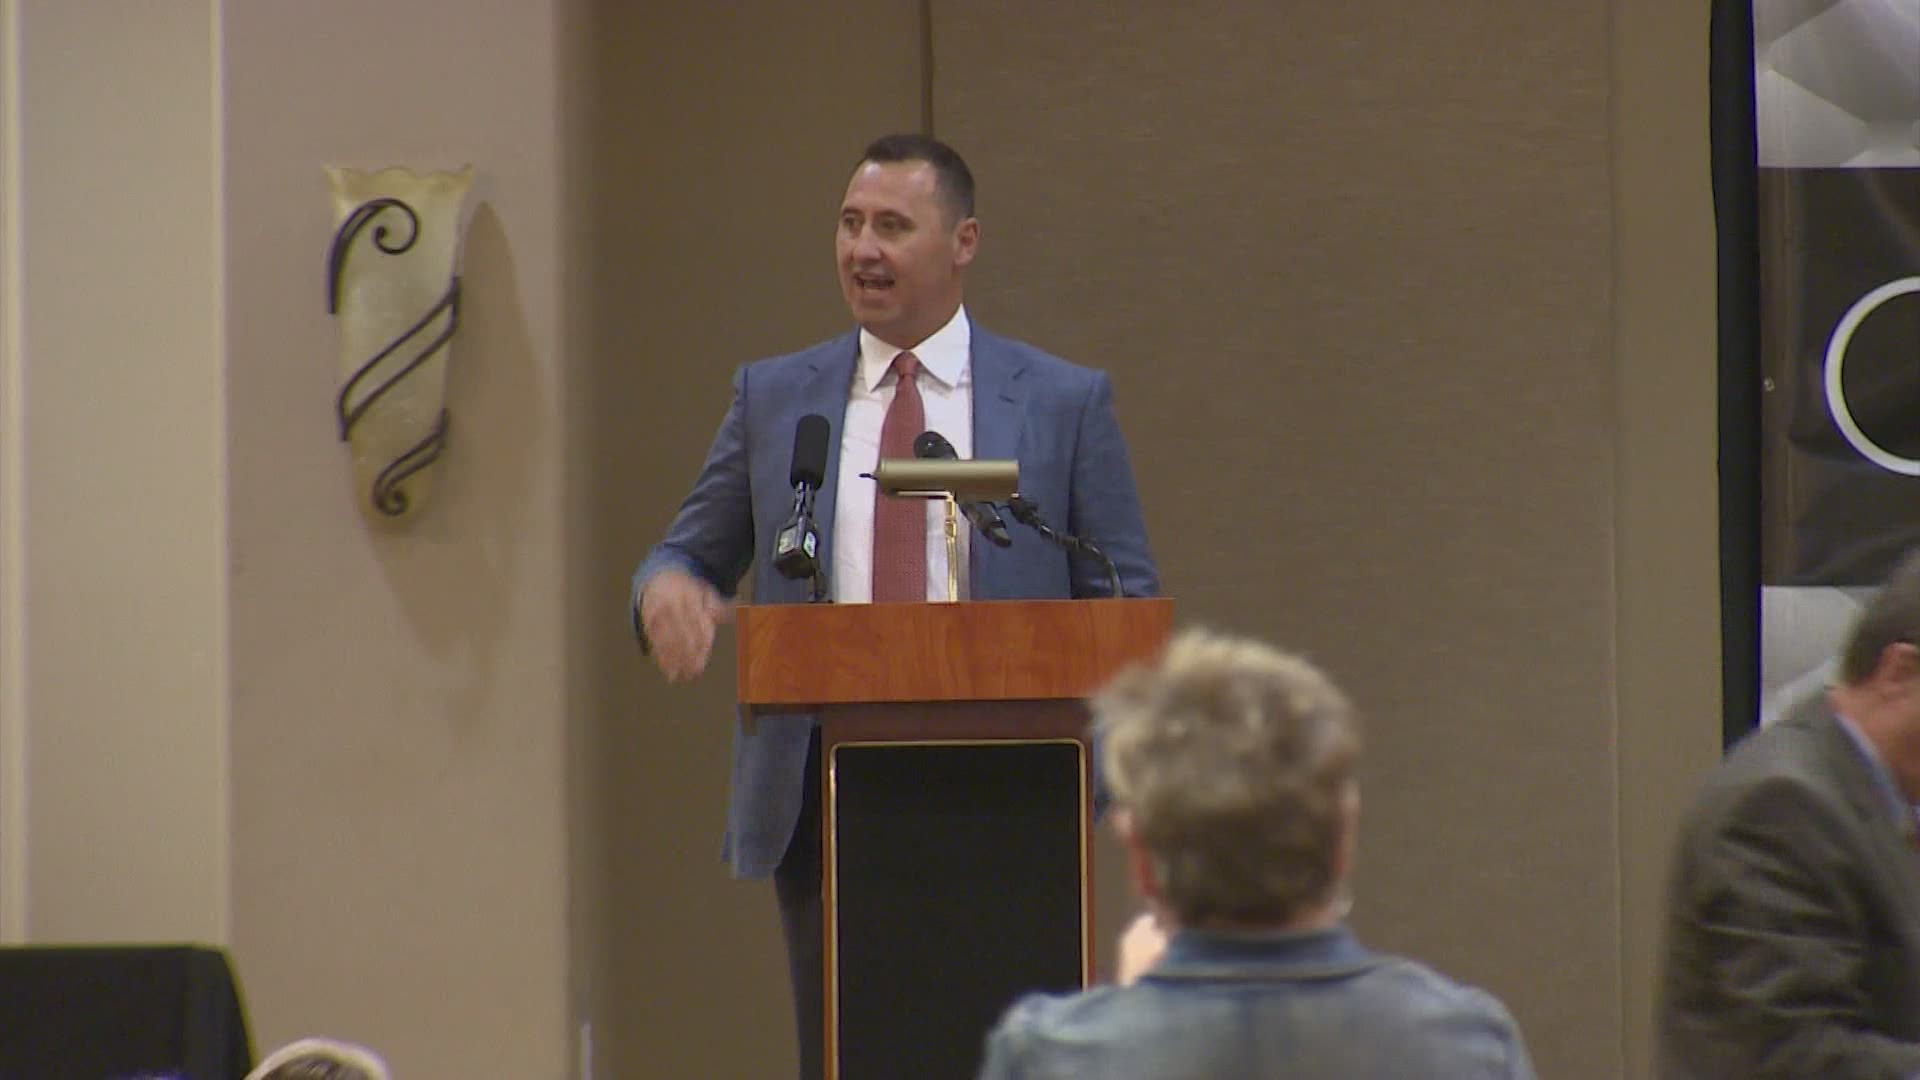 University of Texas football coach Steve Sarkisian spoke to the Touchdown Club of Houston in his first public appearance since being named the Longhorns' head coach.